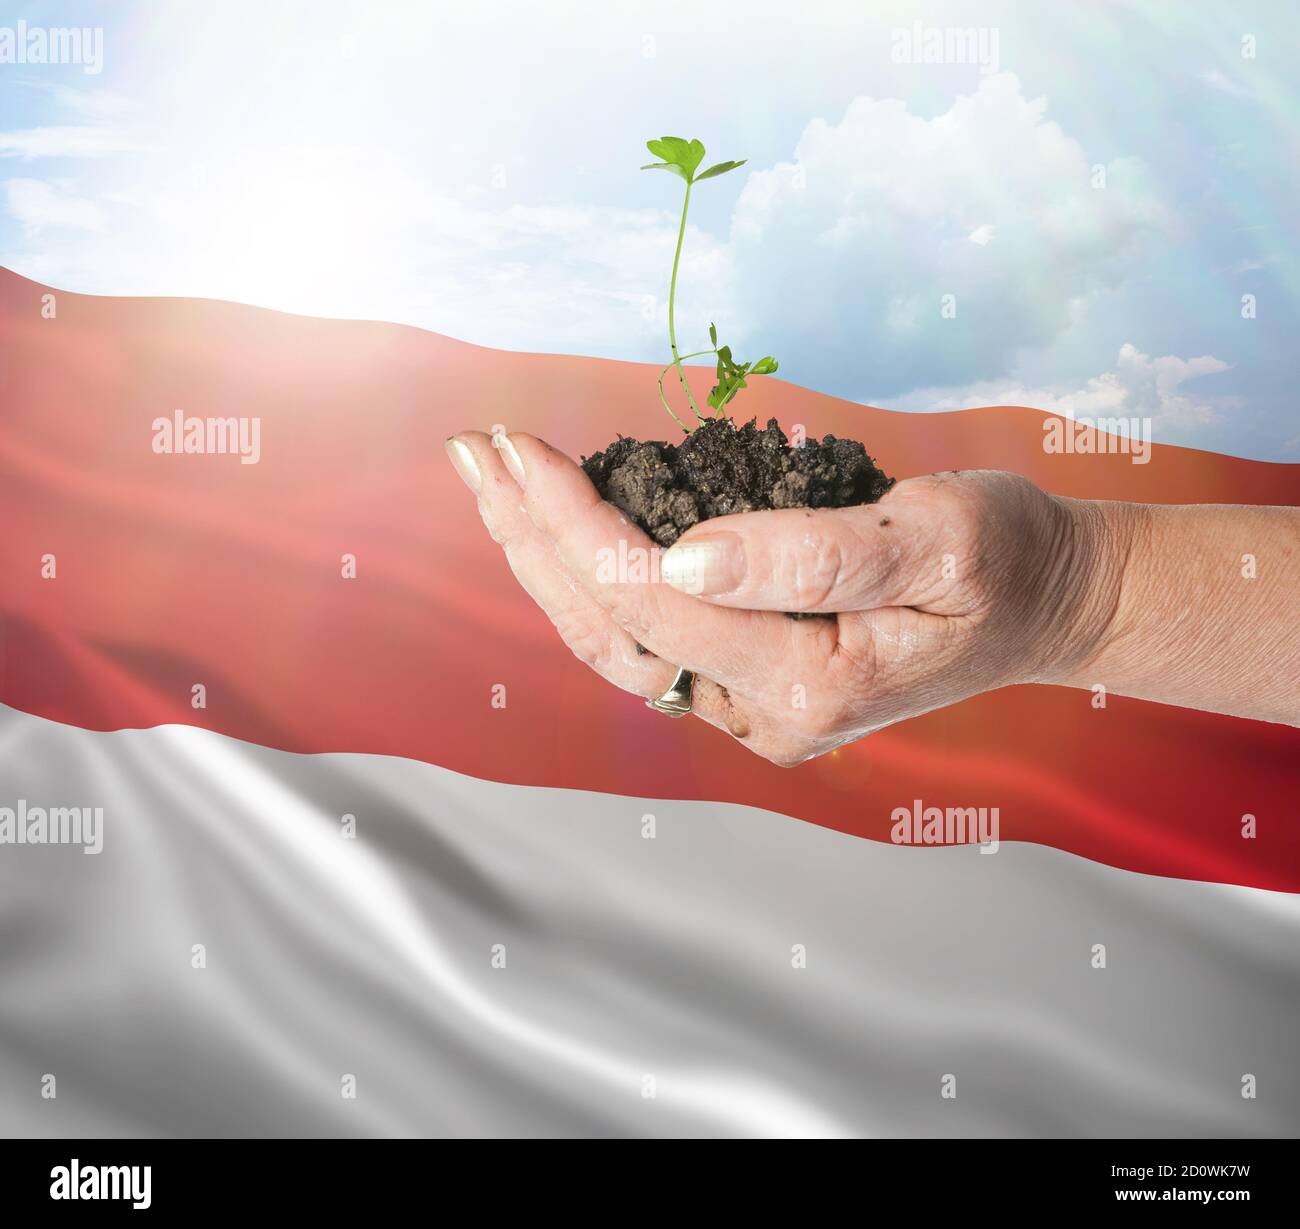 Monaco growth and new beginning. Green renewable energy and ecology concept. Hand holding young plant. Stock Photo